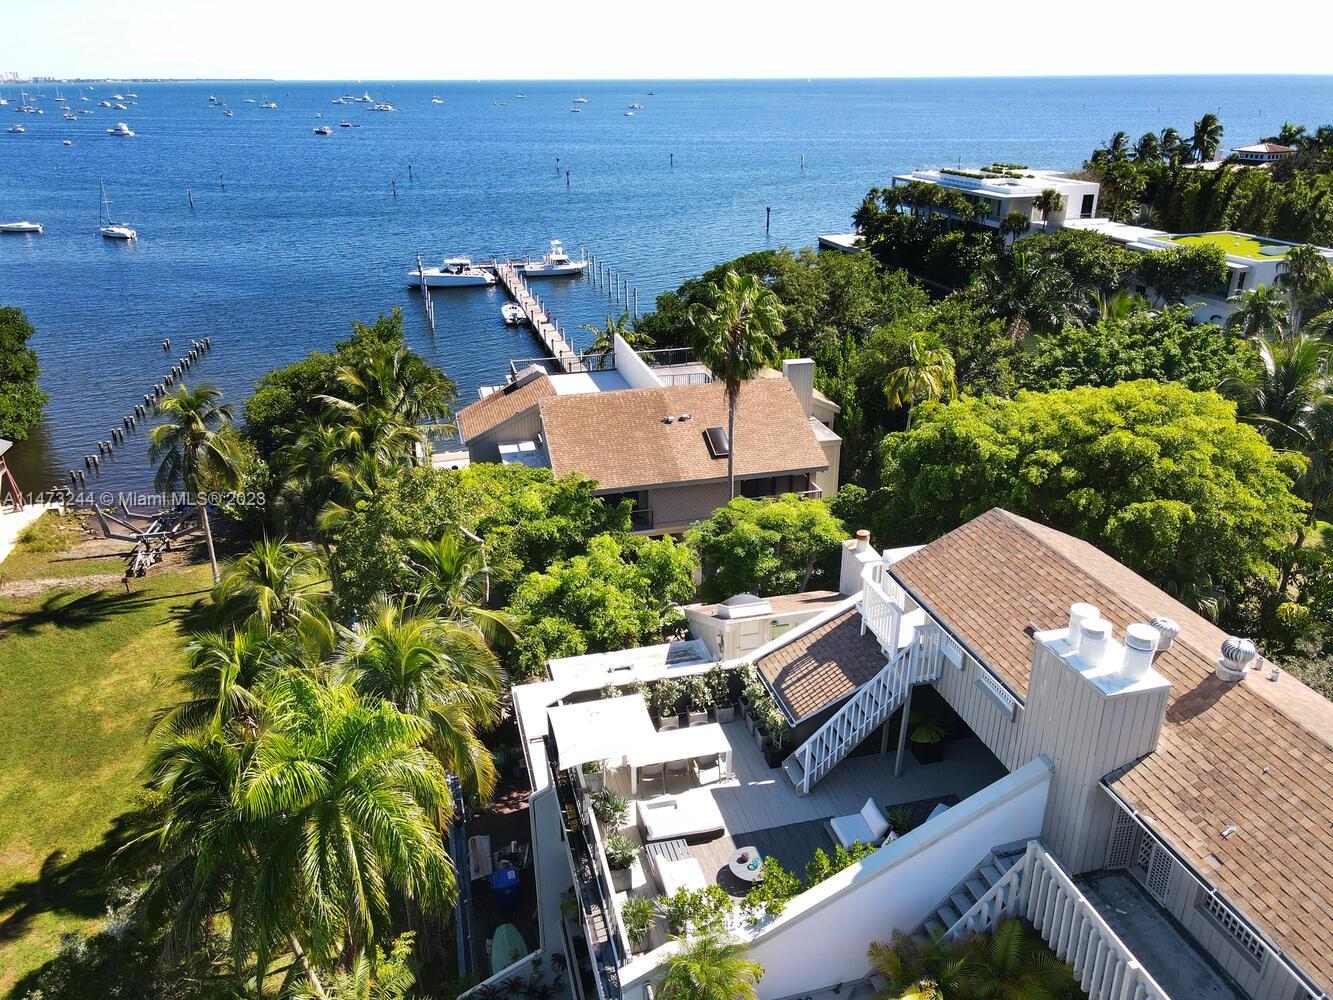 One-of-a kind, spectacular waterfront townhome in Abitare, an ultra-private 24/7 guard-gated community secluded in a natural hardwood hammock on Biscayne Bay. Light-filled living spaces w/25’ ceilings & a modern vibe, overlook the lush tree canopy of the Barnacle State Park. Updates & features include new porcelain tile flooring , all new baths, 1st level private pool + a high-end custom kitchen w/ Eggersman cabinetry & new quartz countertops. 3rd level primary suite features separate sitting area & stunning bath w/ soaking tub & glass enclosed rain shower. Elevator to all 4 levels. Roof top deck offers panoramic bay views. Abitare has a community pool & dock w/slips (35’x25’) available to each residence. Not in a flood zone. Just steps to shopping & dining in the Coconut Grove village.